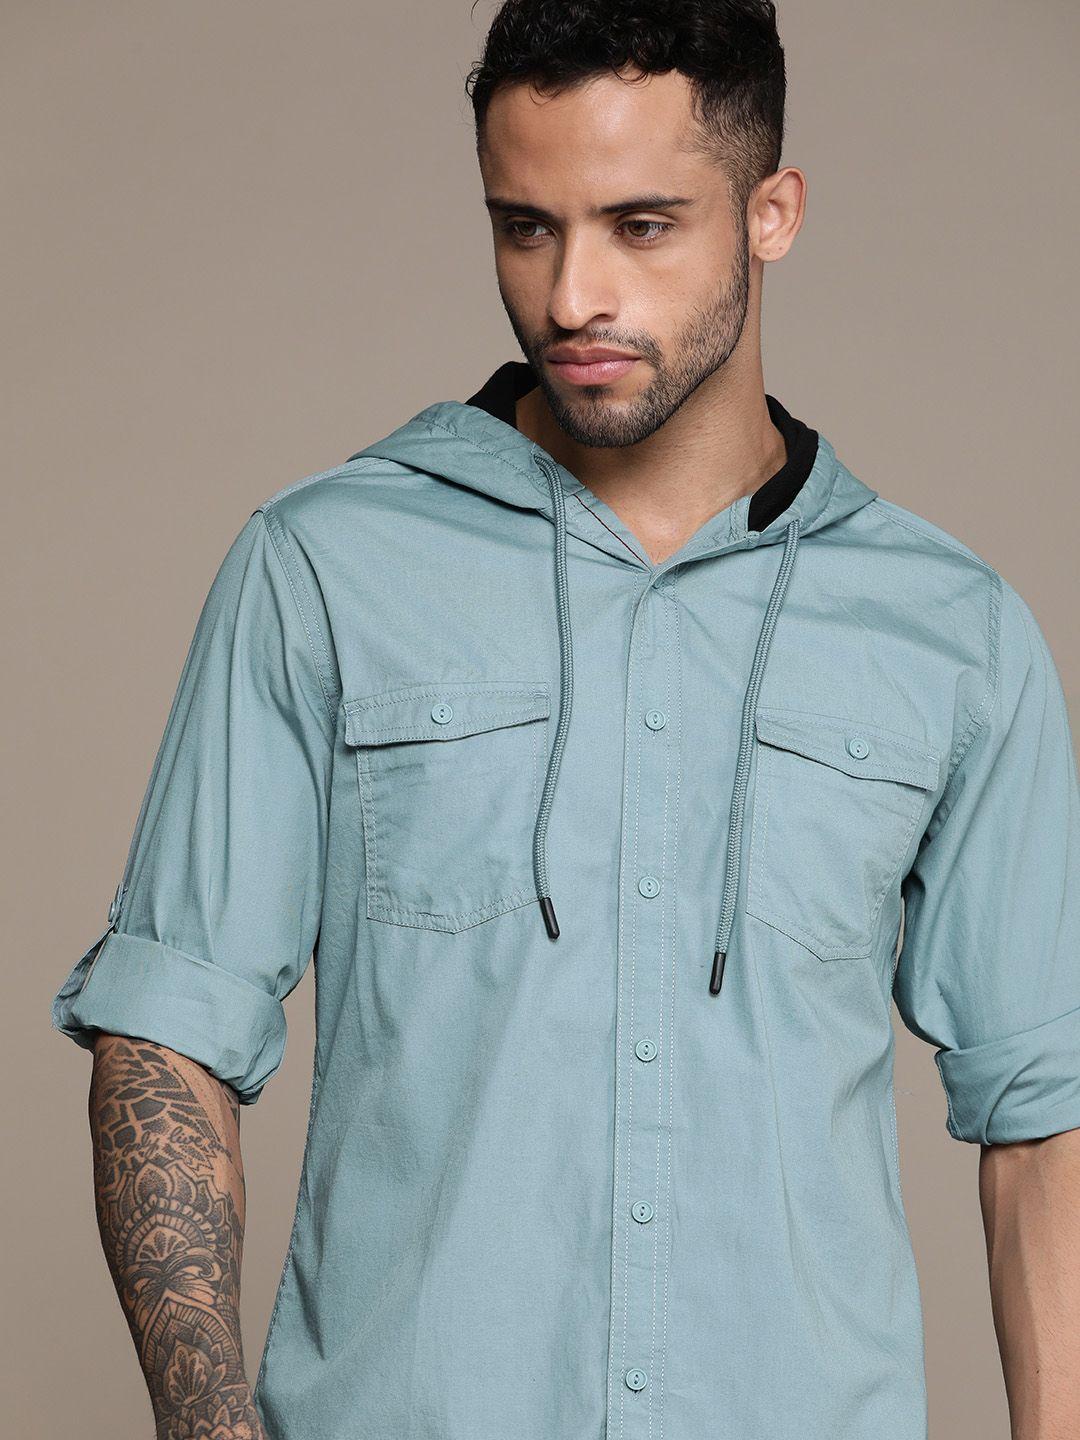 the roadster lifestyle co. cotton hooded casual shirt